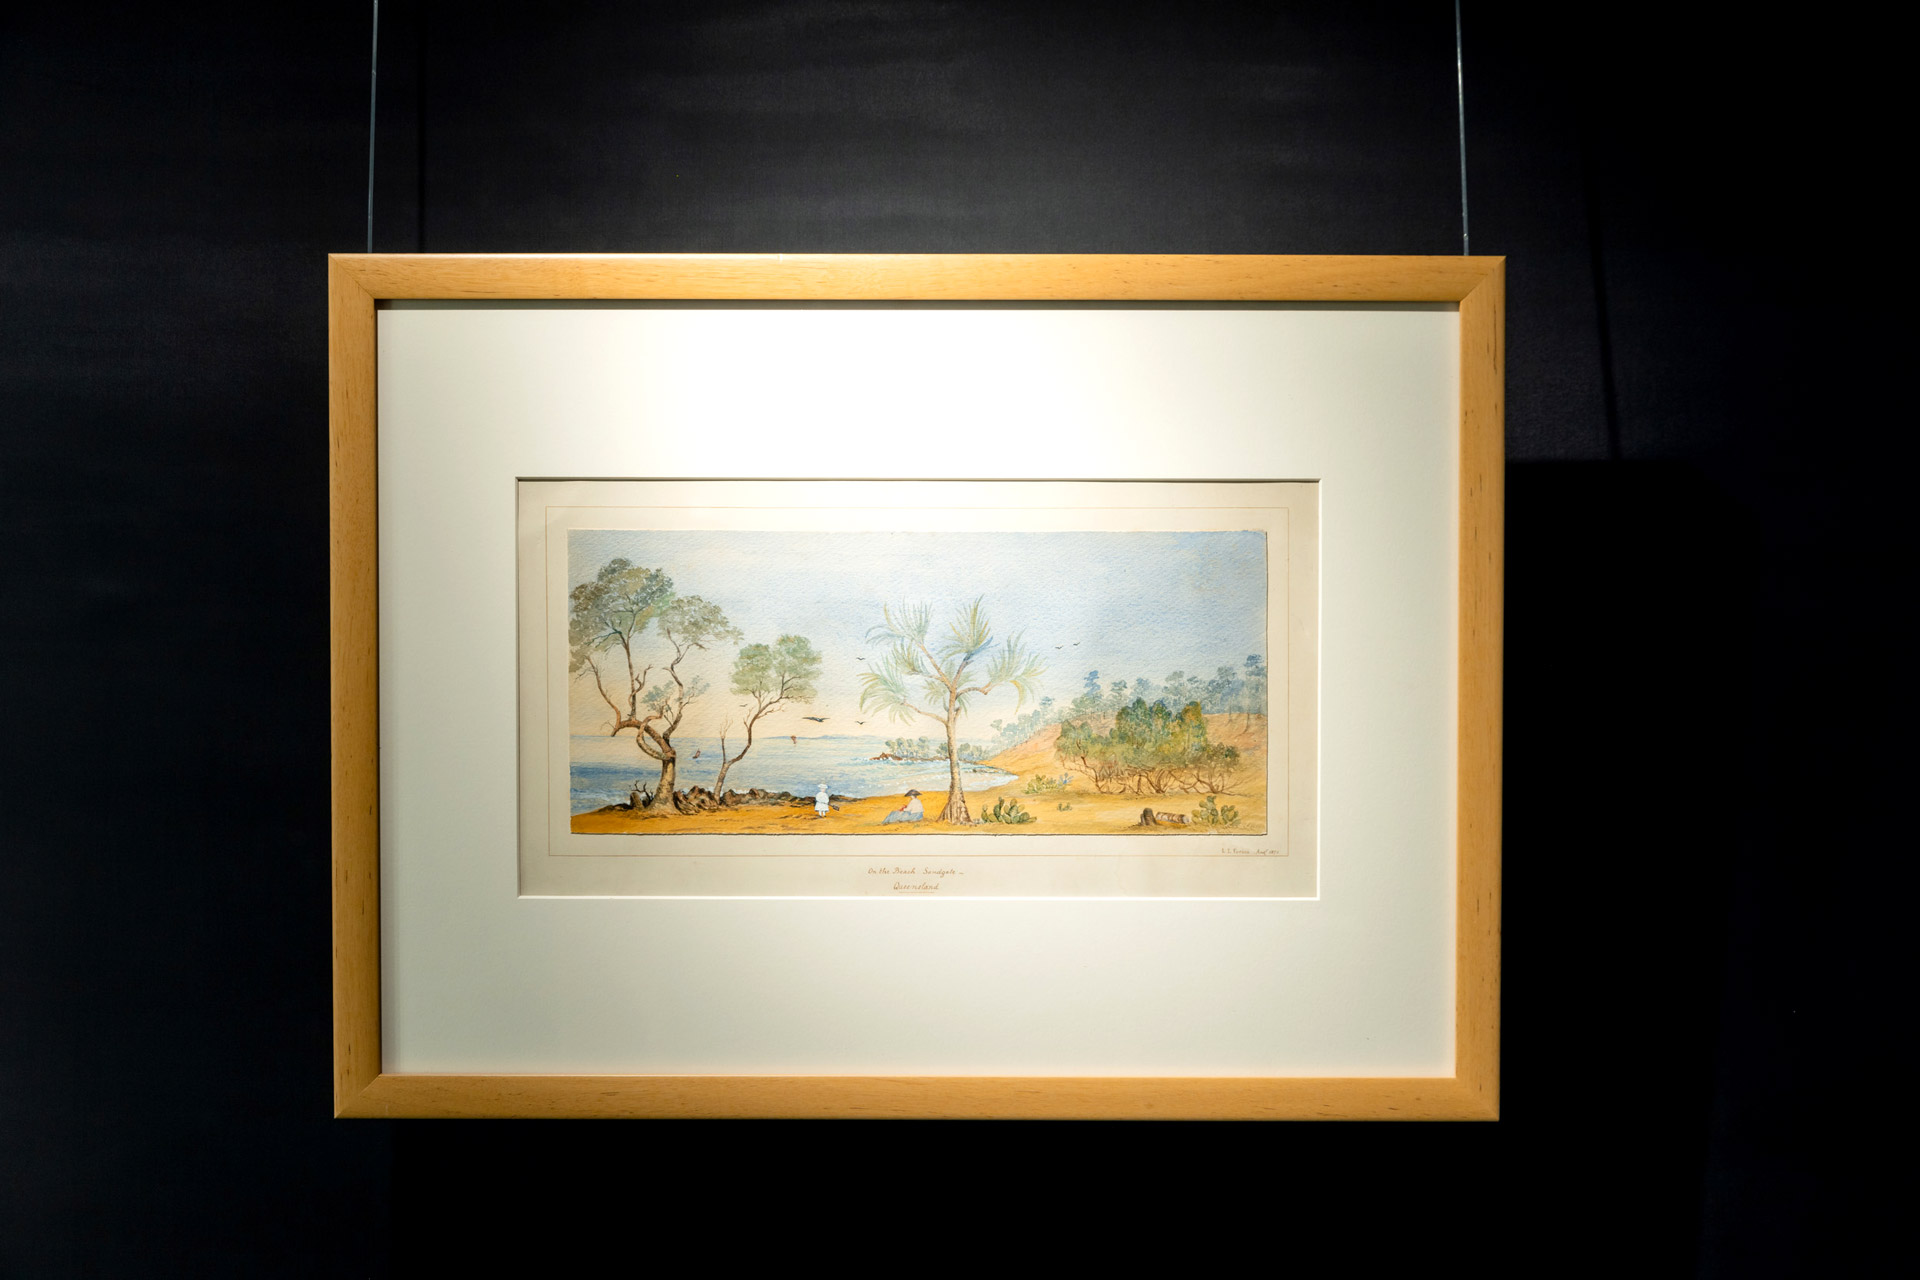 The painting depicts the small seaside resort of Sandgate.